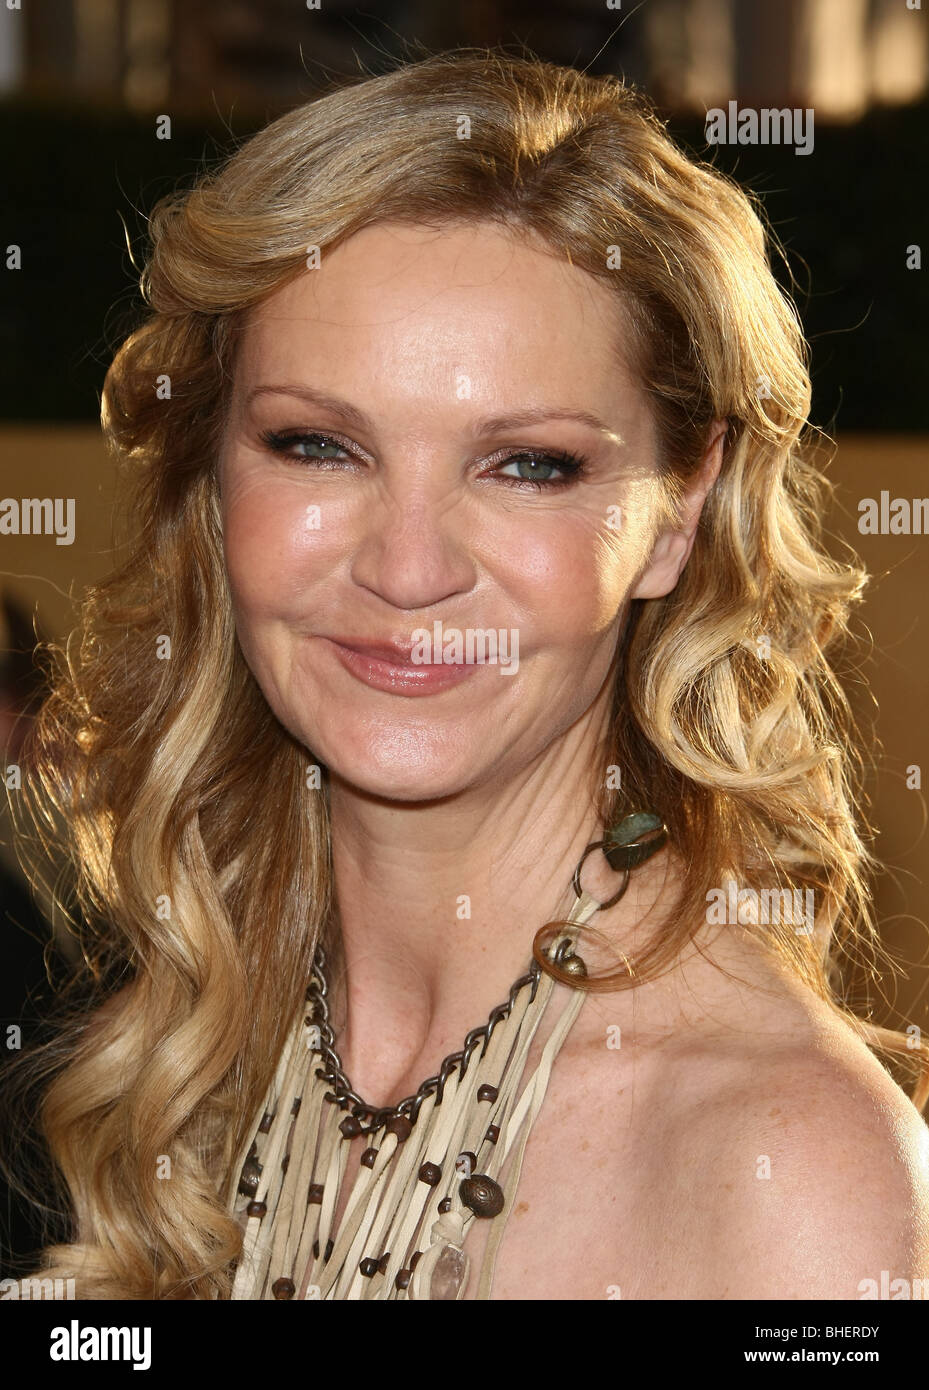 JOAN ALLEN 16TH ANNUAL Screen Actors Guild AWARDS red carpet DOWNTOWN LOS ANGELES CA USA 23 Gennaio 2010 Foto Stock